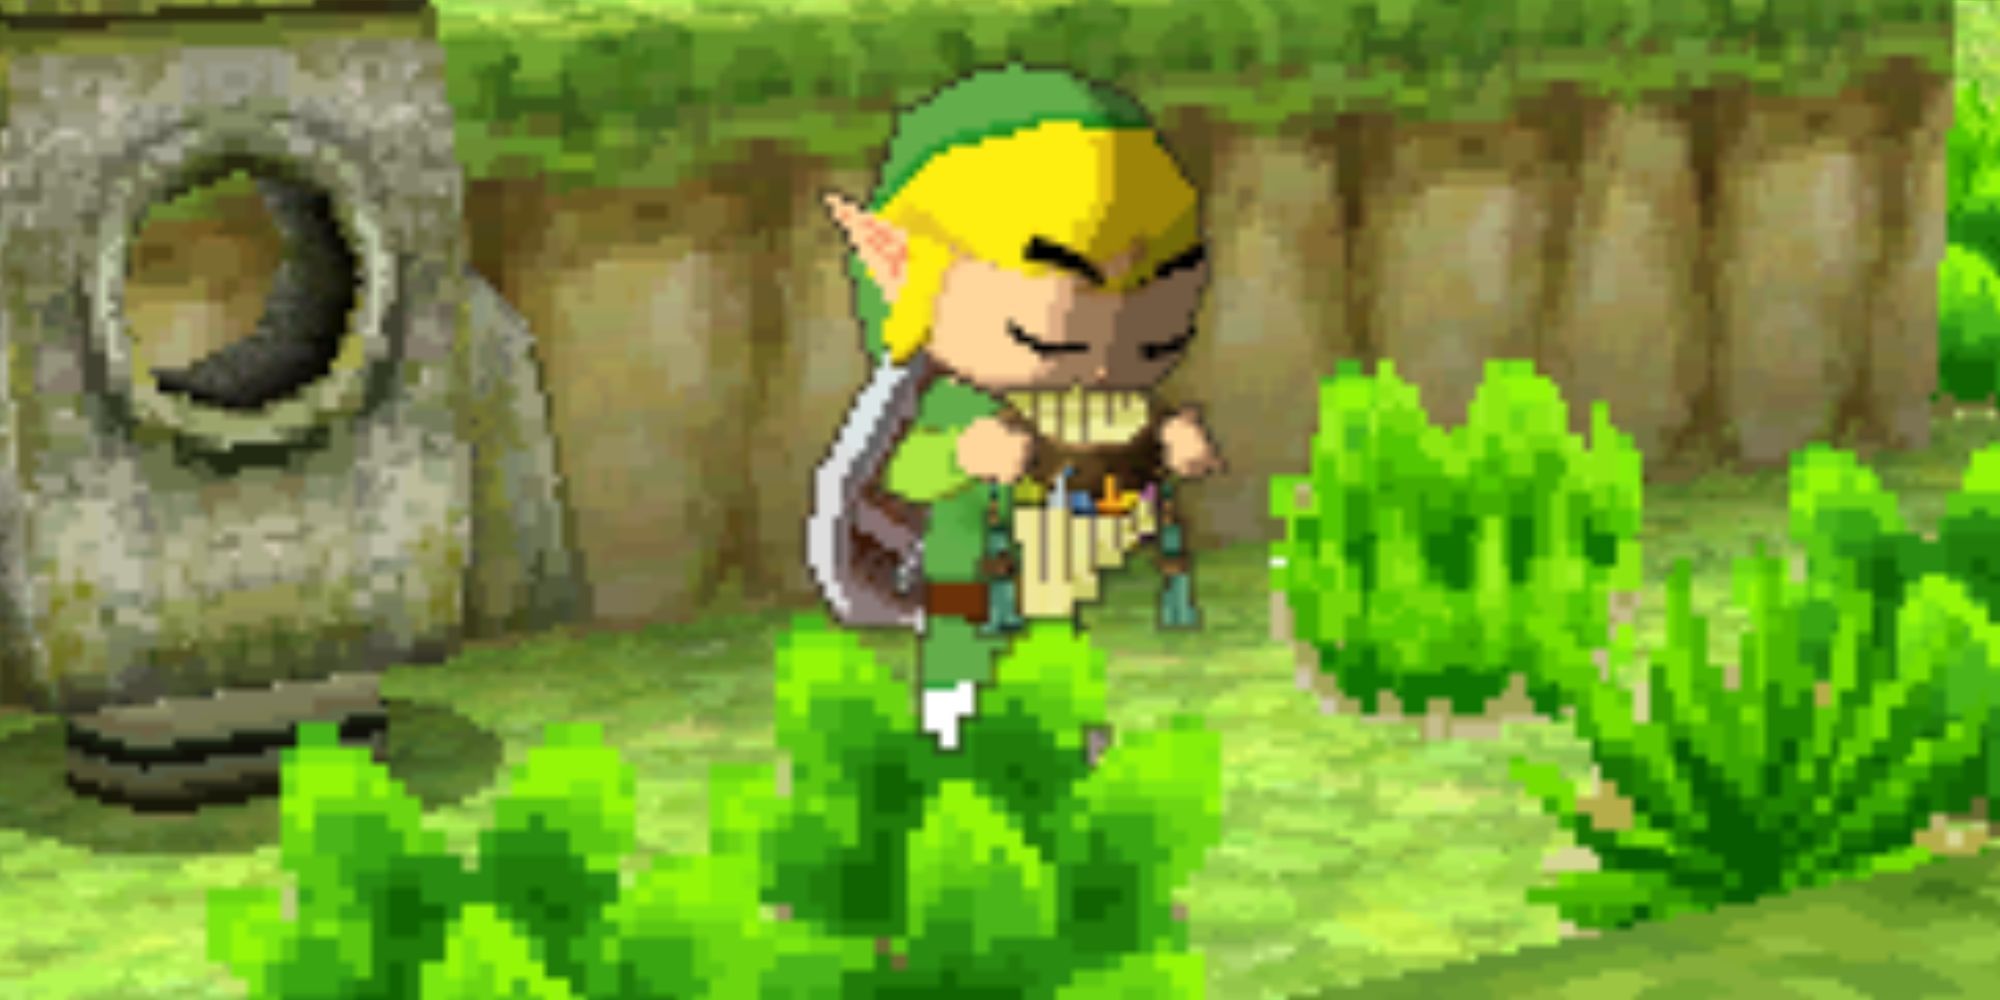 Toon Link plays the Spirit Flute outside by an Air Stone